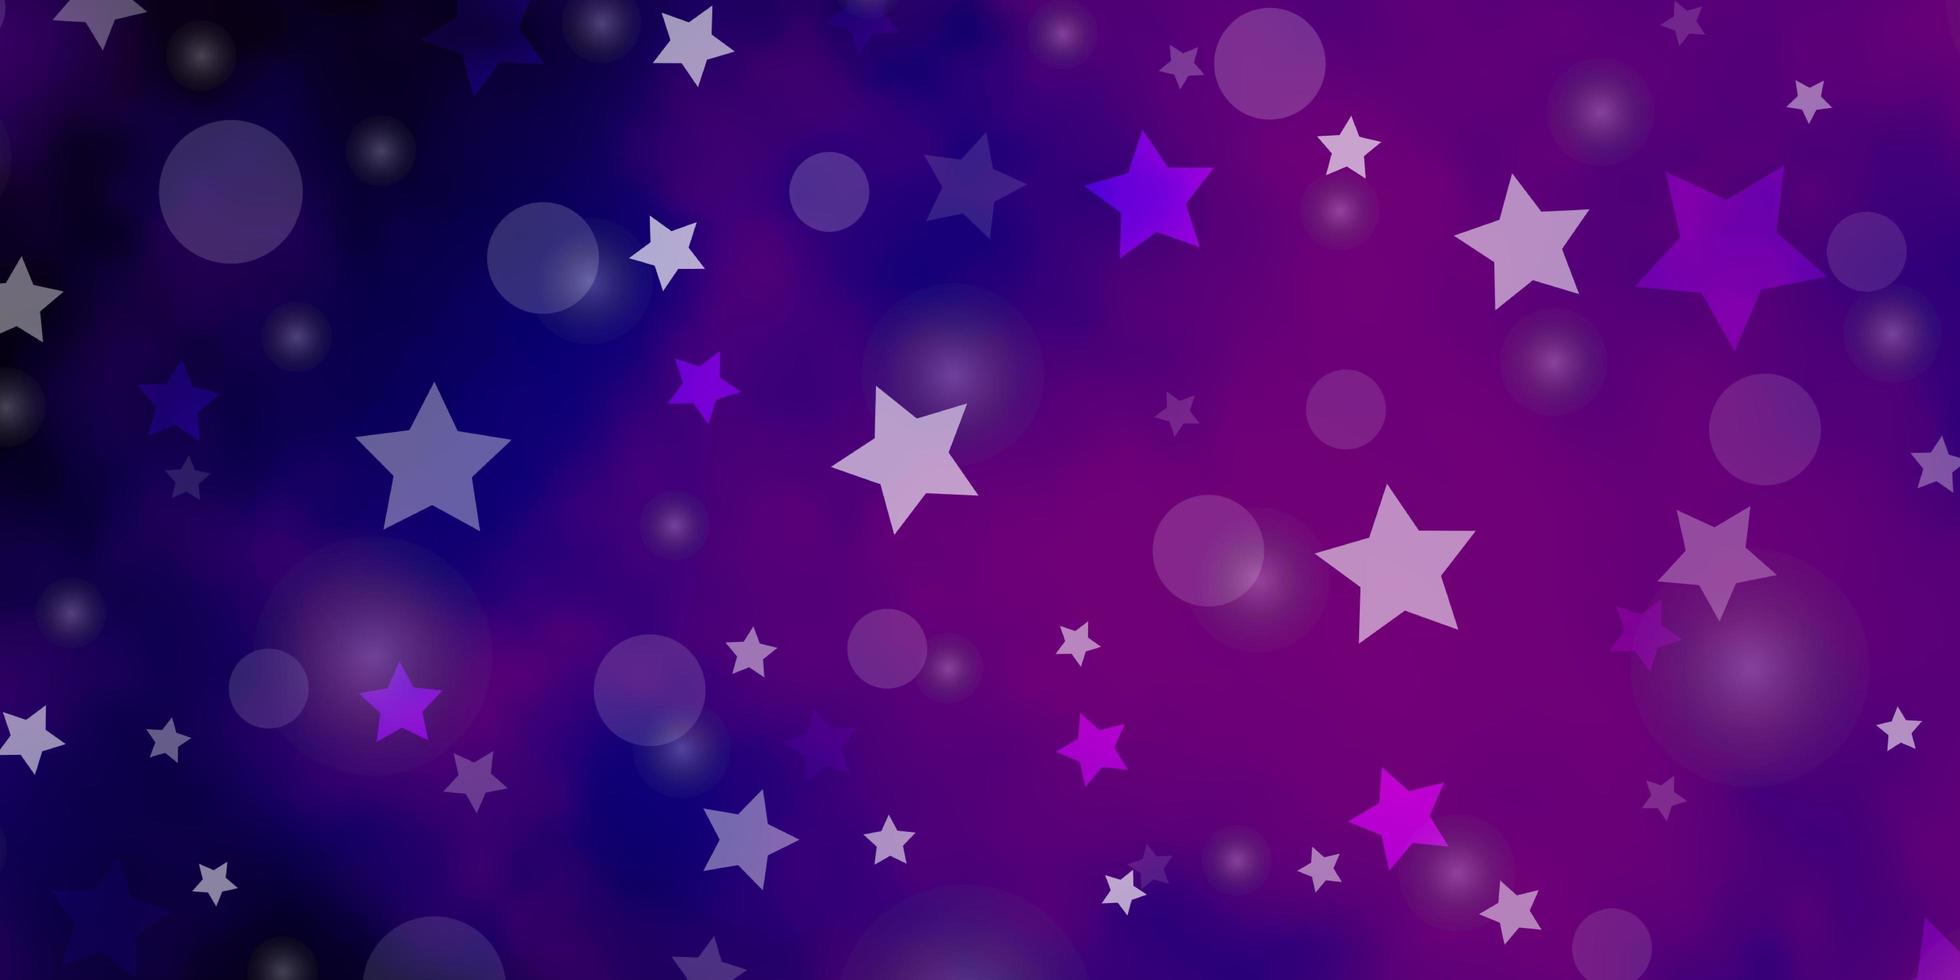 Dark Purple, Pink vector template with circles, stars.